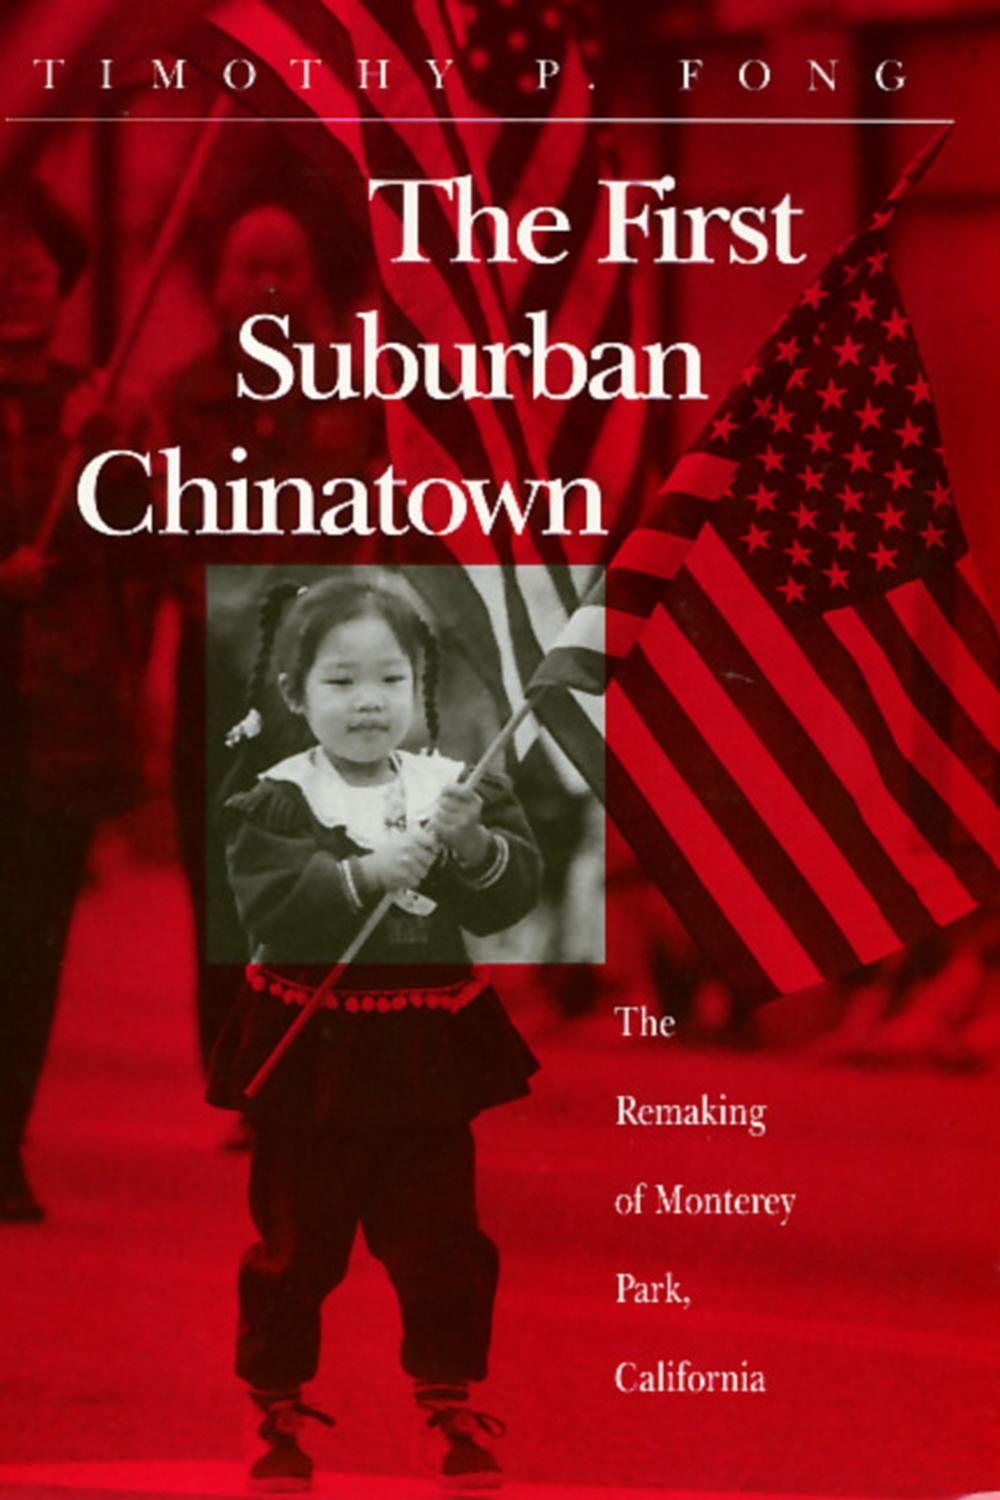 The First Suburban Chinatown - Timothy Fong